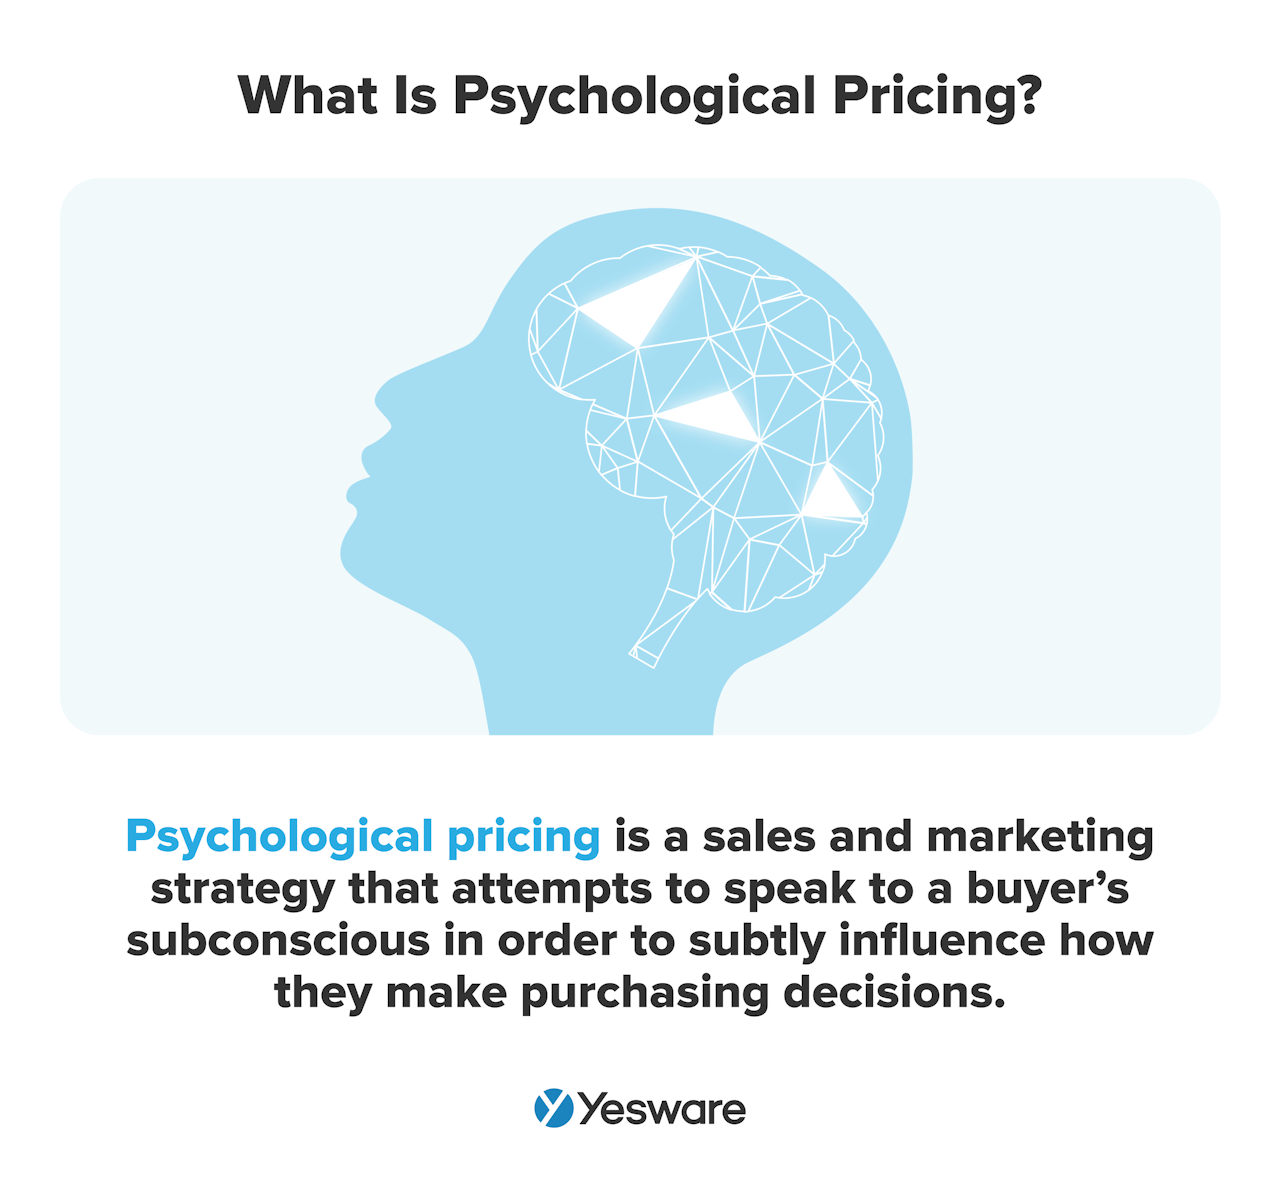 what is psychological pricing?